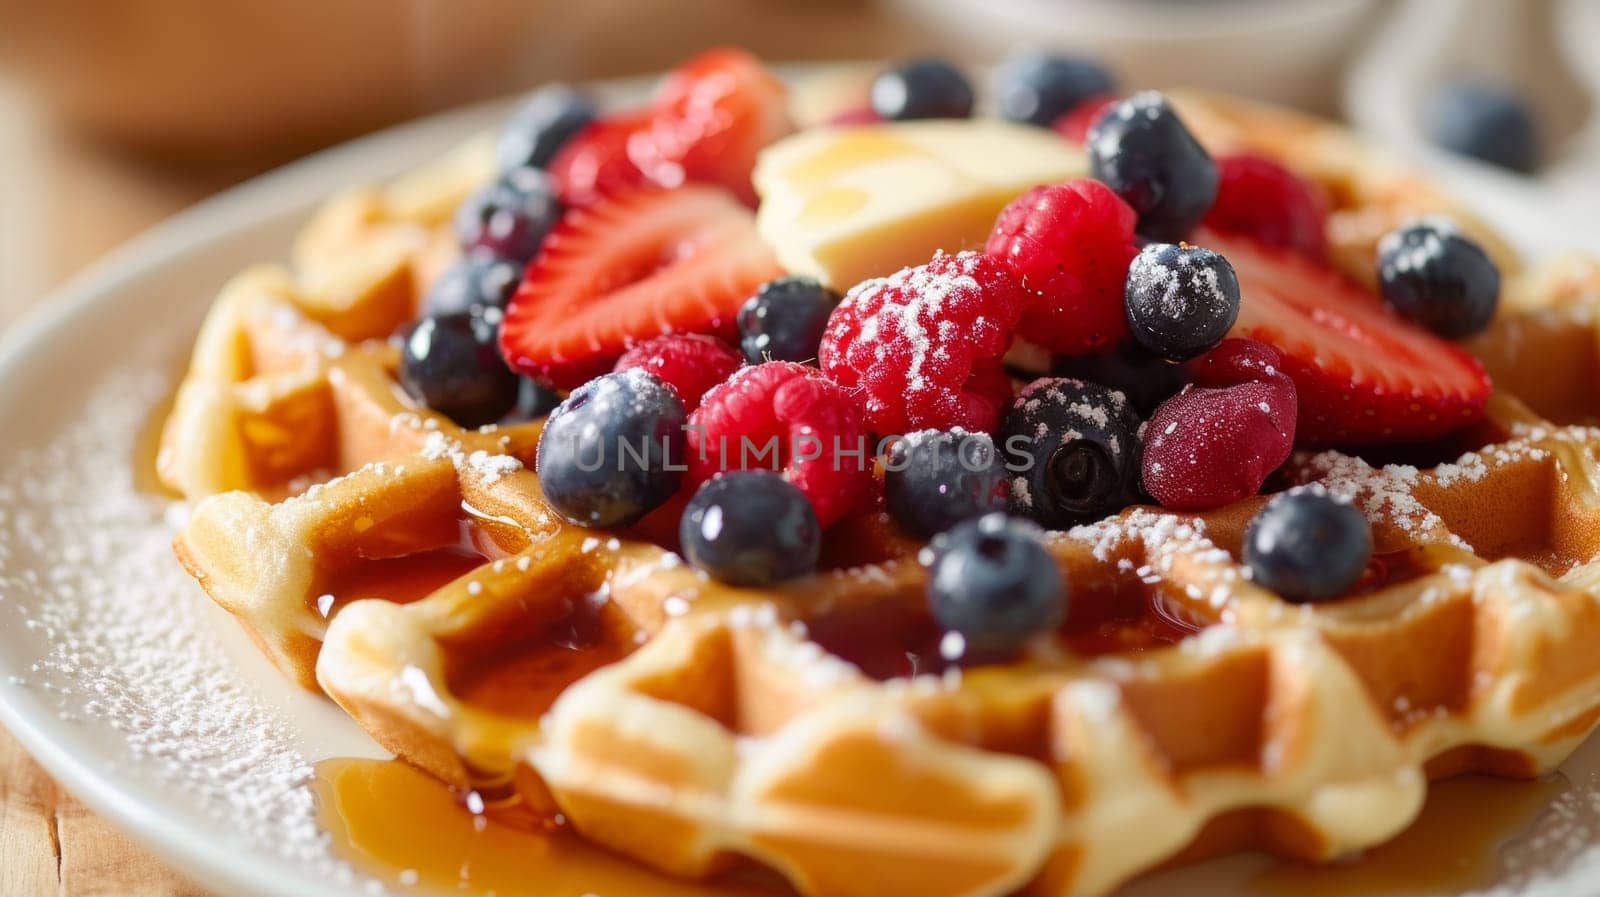 A waffle with berries and powdered sugar on a plate